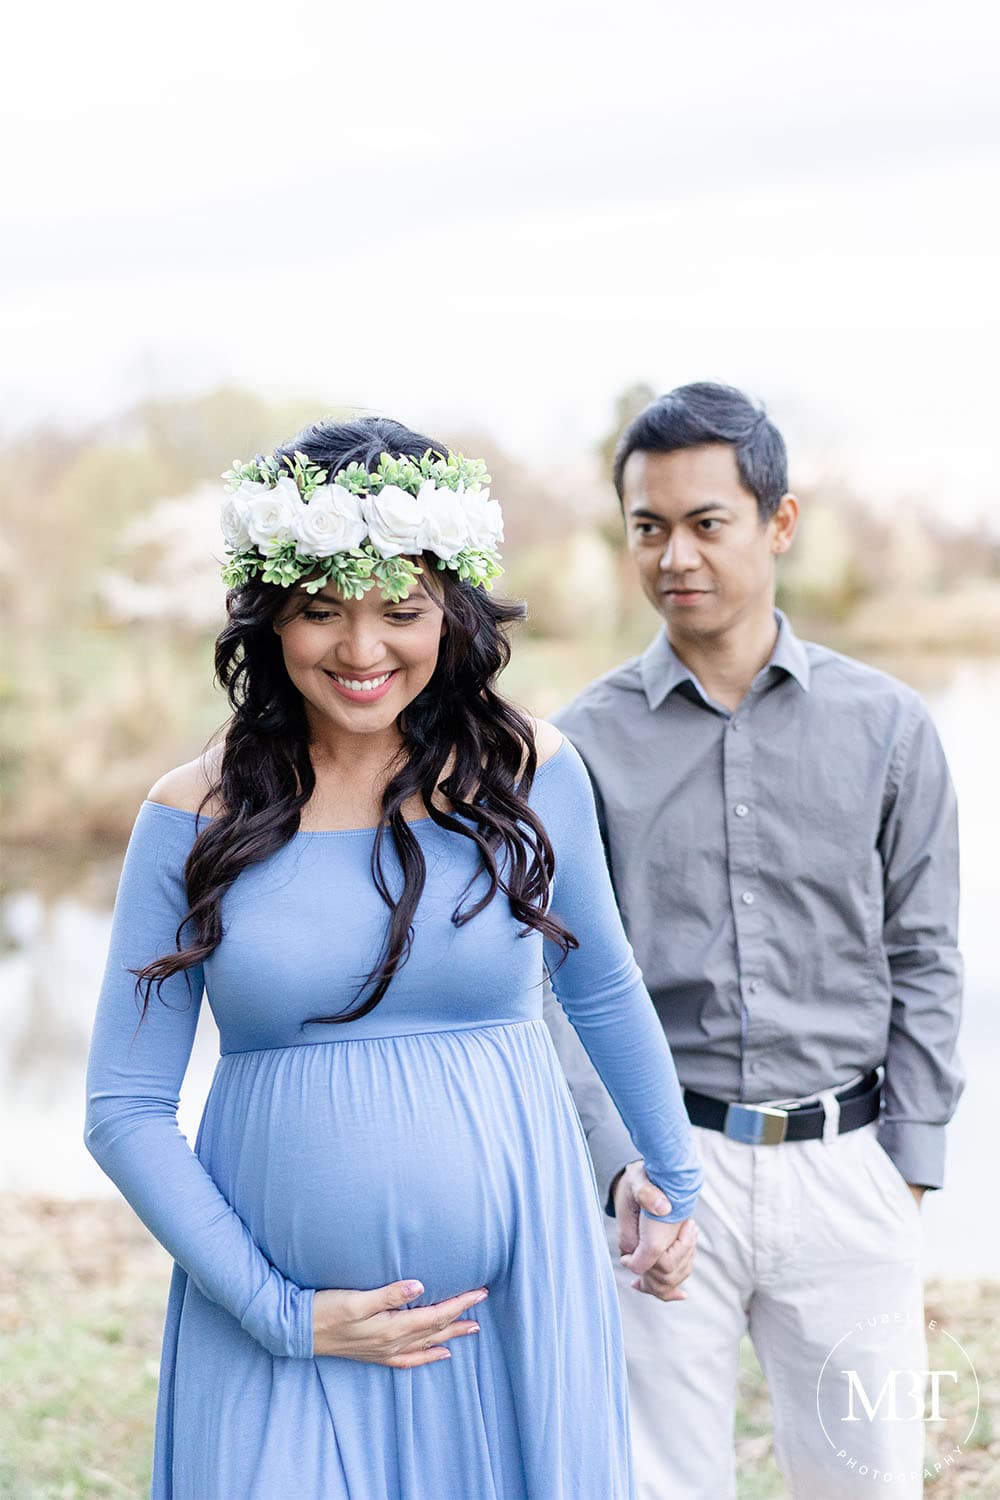 expecting couple walking while holding hands during their maternity session in Gainesville, Virginia taken by a Northern Virginia maternity photographer